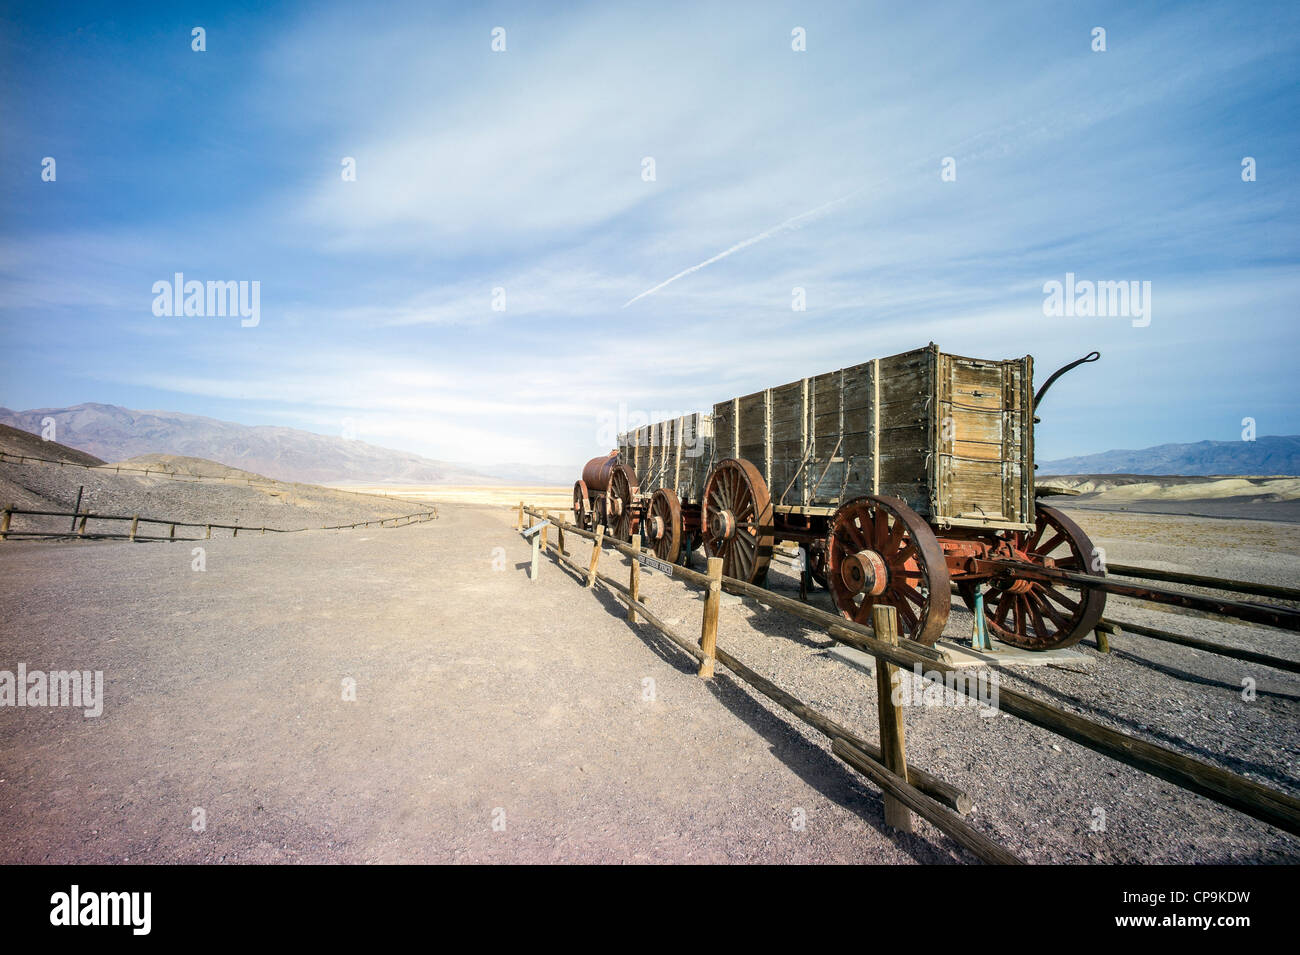 Ruins of the Harmony Borax Works with Twenty Mule Team ore wagons and water tanker Death Valley National Park, California, USA Stock Photo